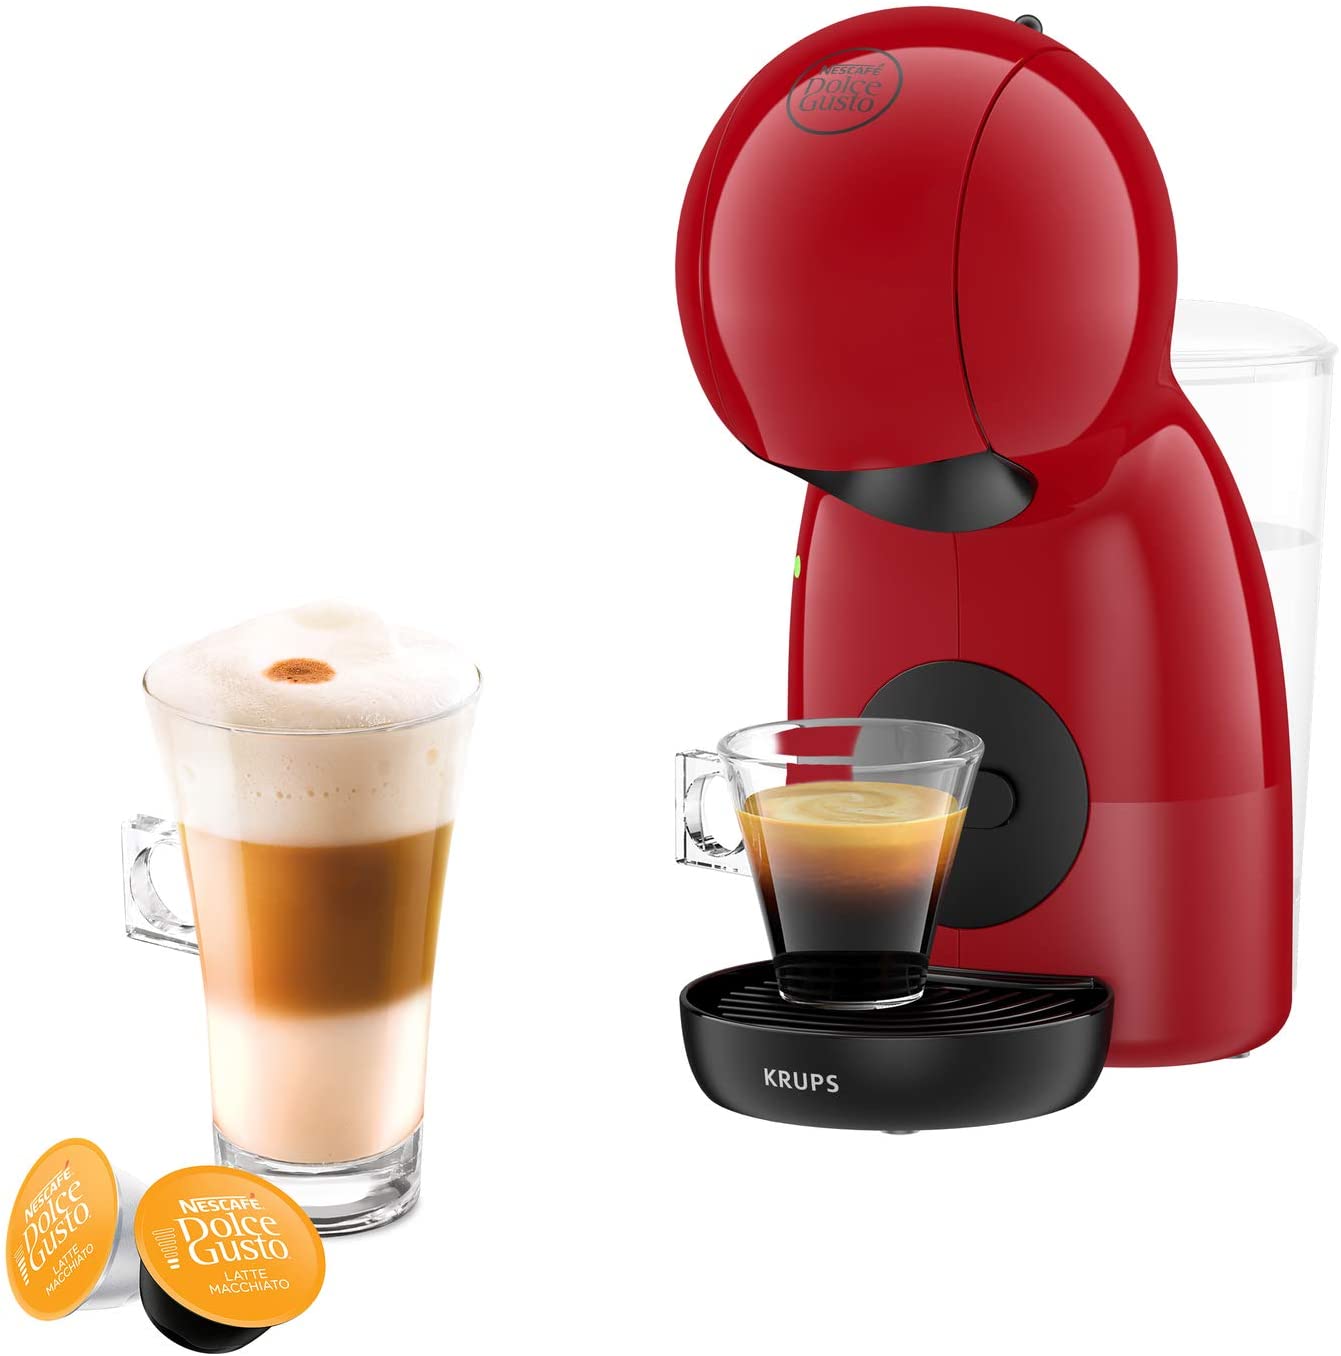 Krups Nescafé Dolce Gusto Piccolo XS, Capsule Coffee Maker, Hot And Cold Drinks, 15 Bar Pump Pressure, Manual Water Dosage, Coffee Machine, red